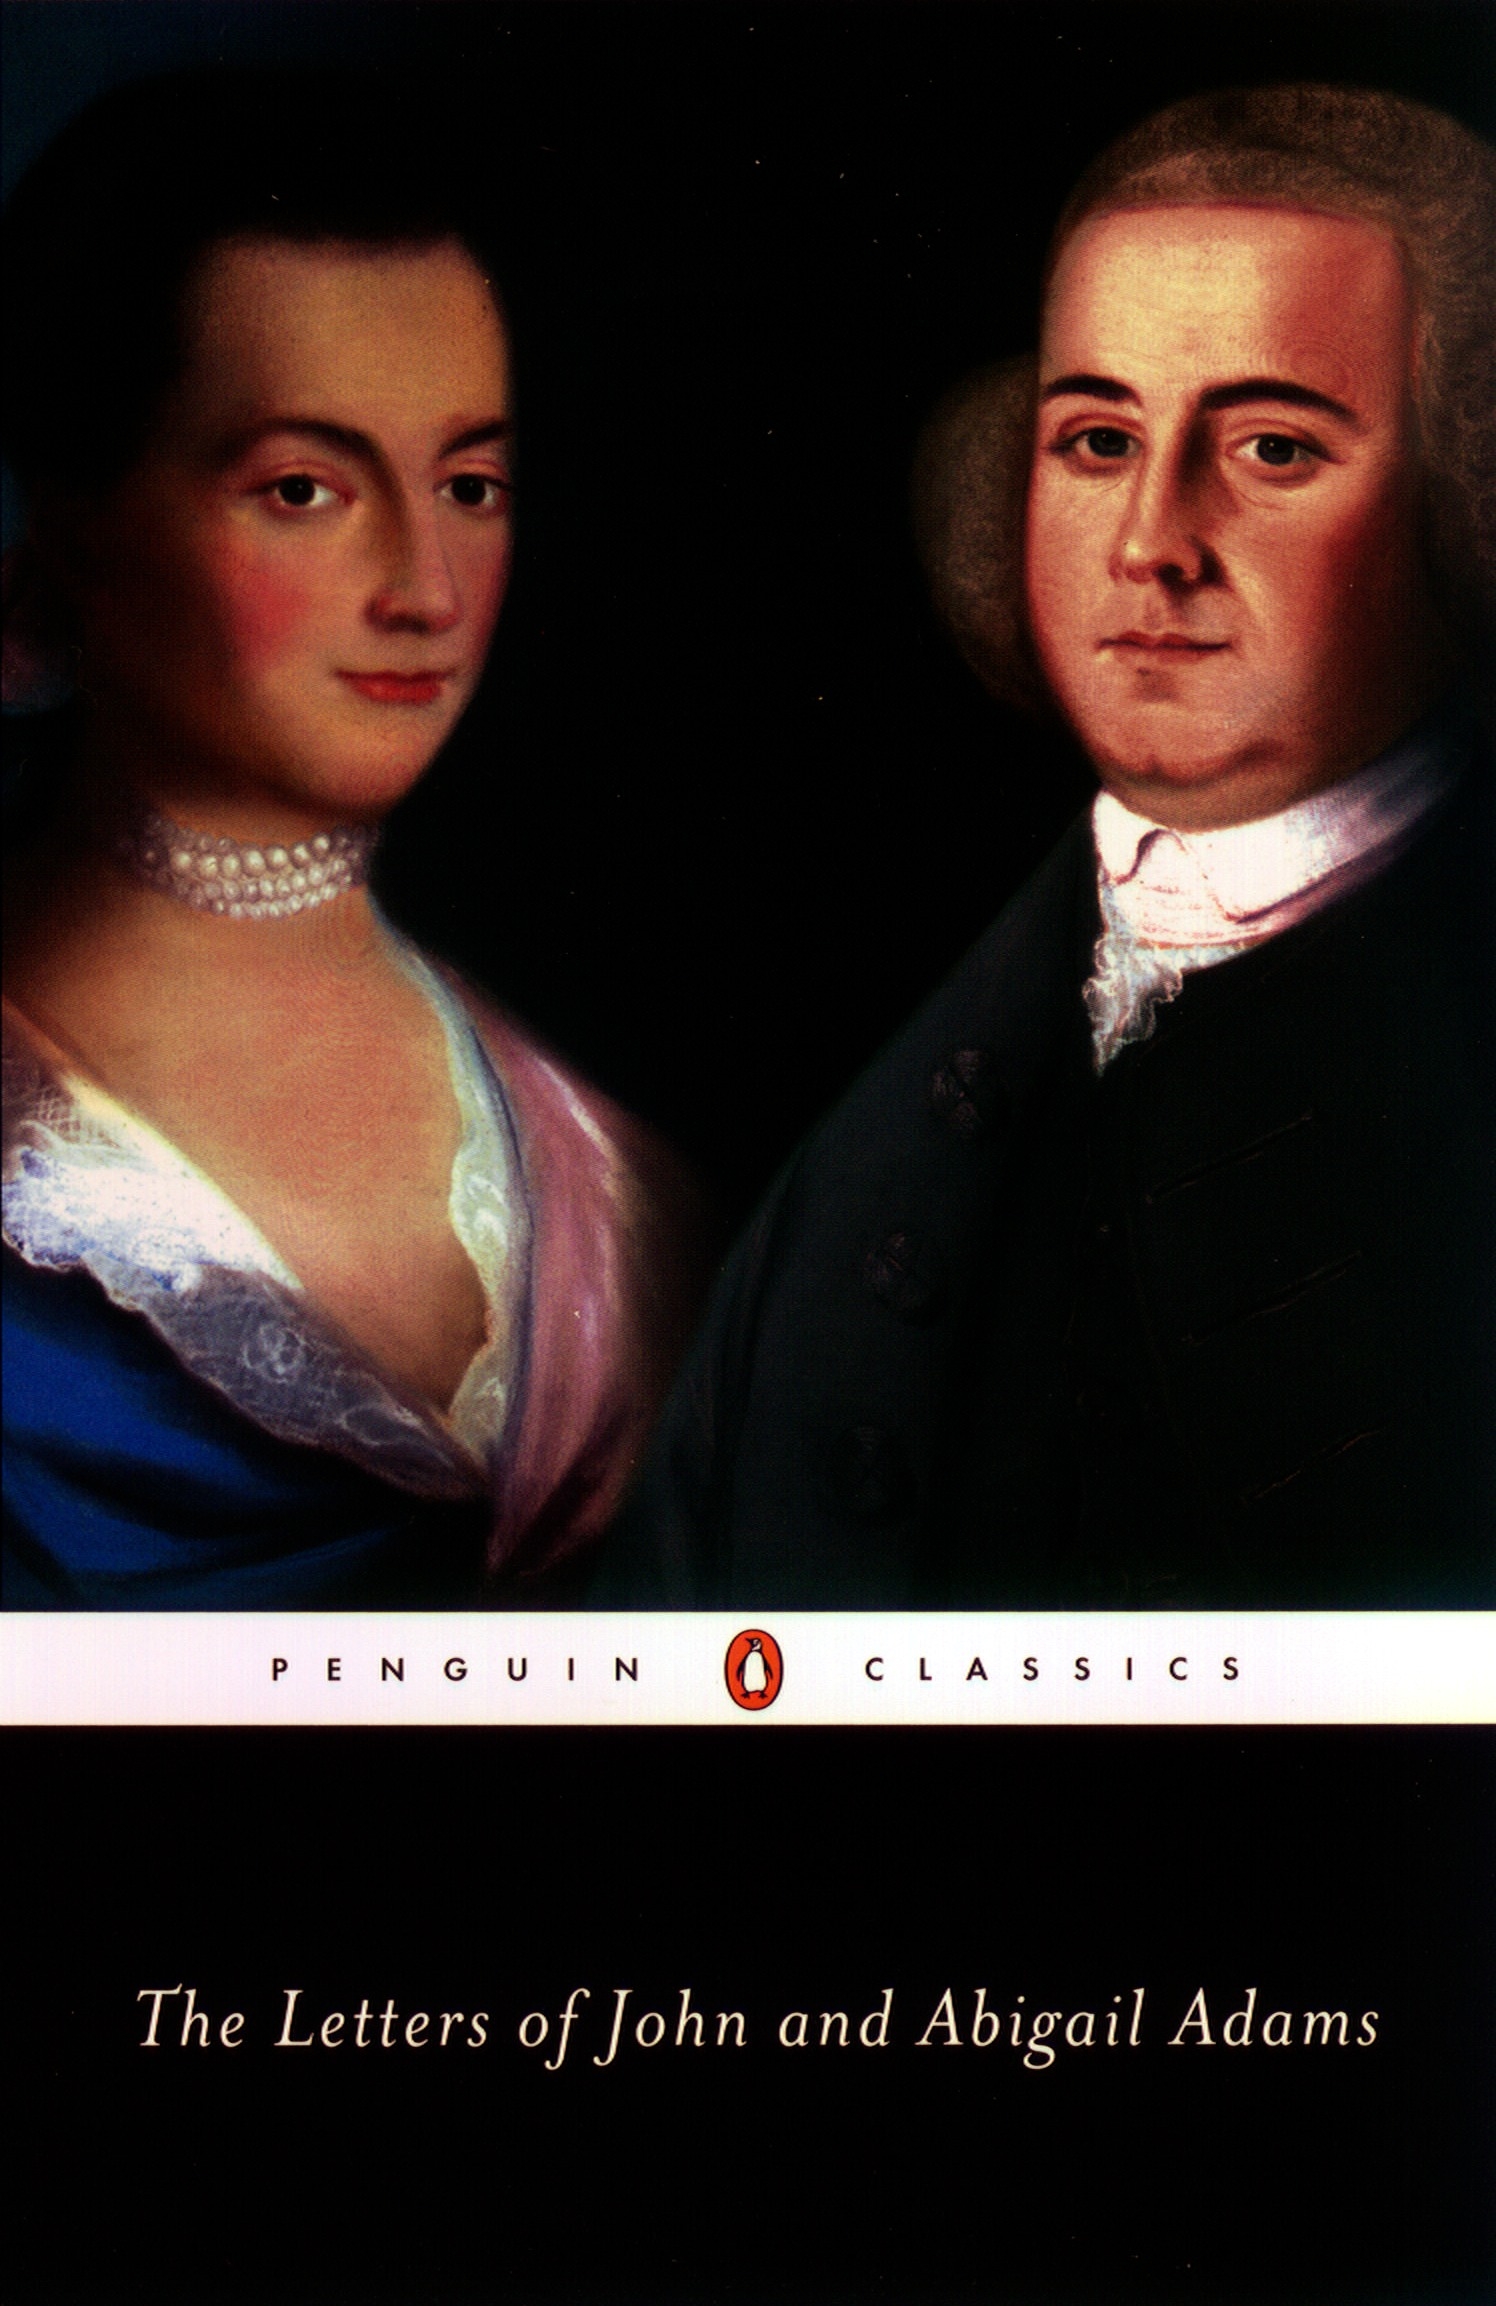 The Letters of John and Abigail Adams by John Adams Penguin Books